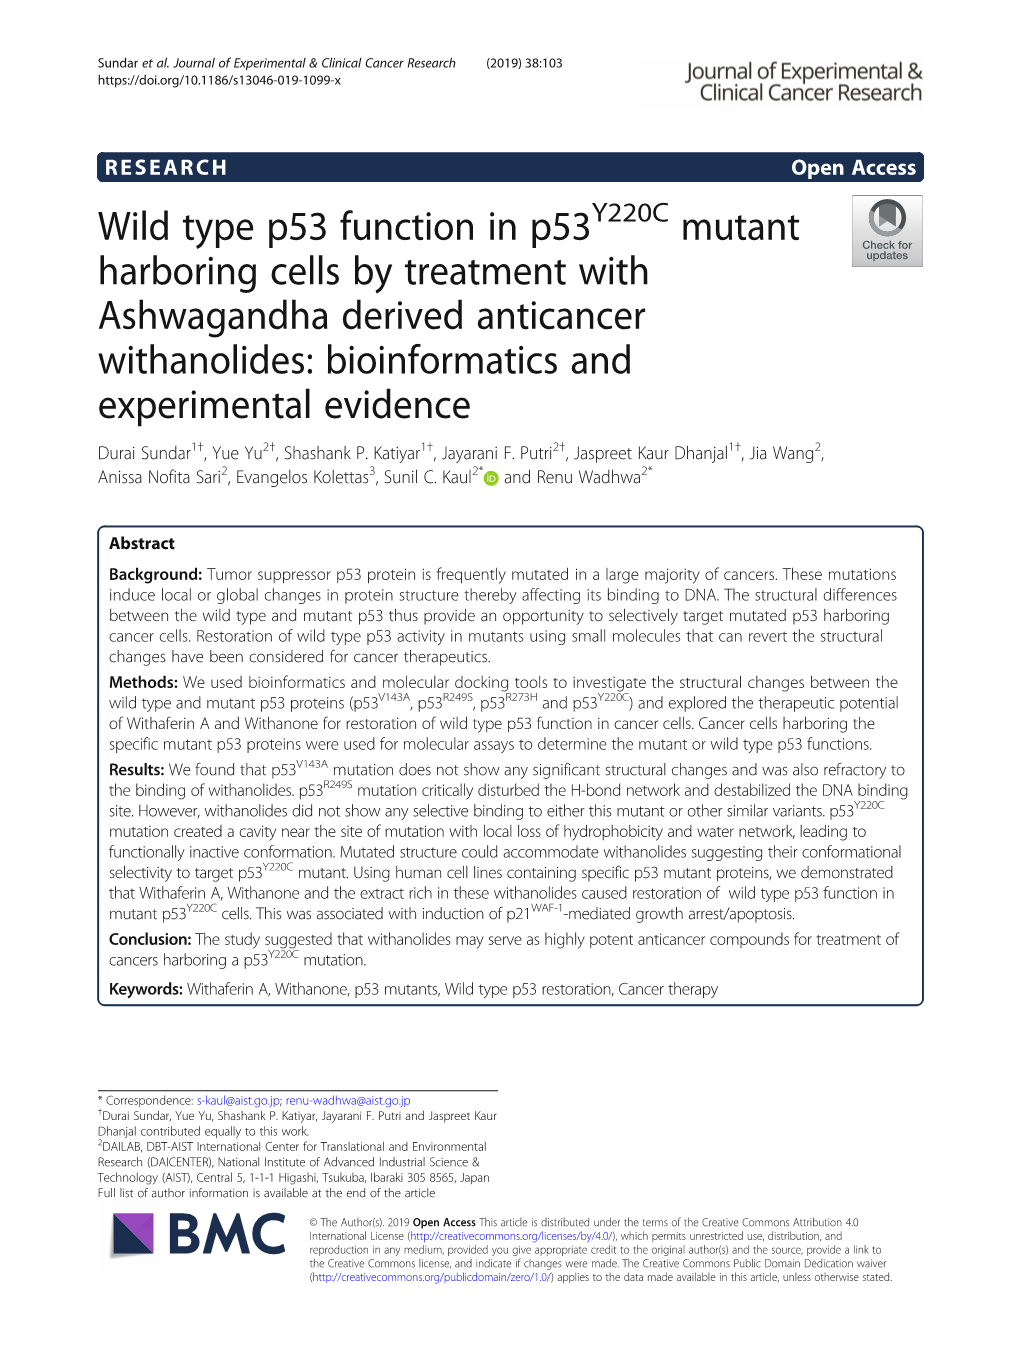 Wild Type P53 Function in P53y220c Mutant Harboring Cells by Treatment